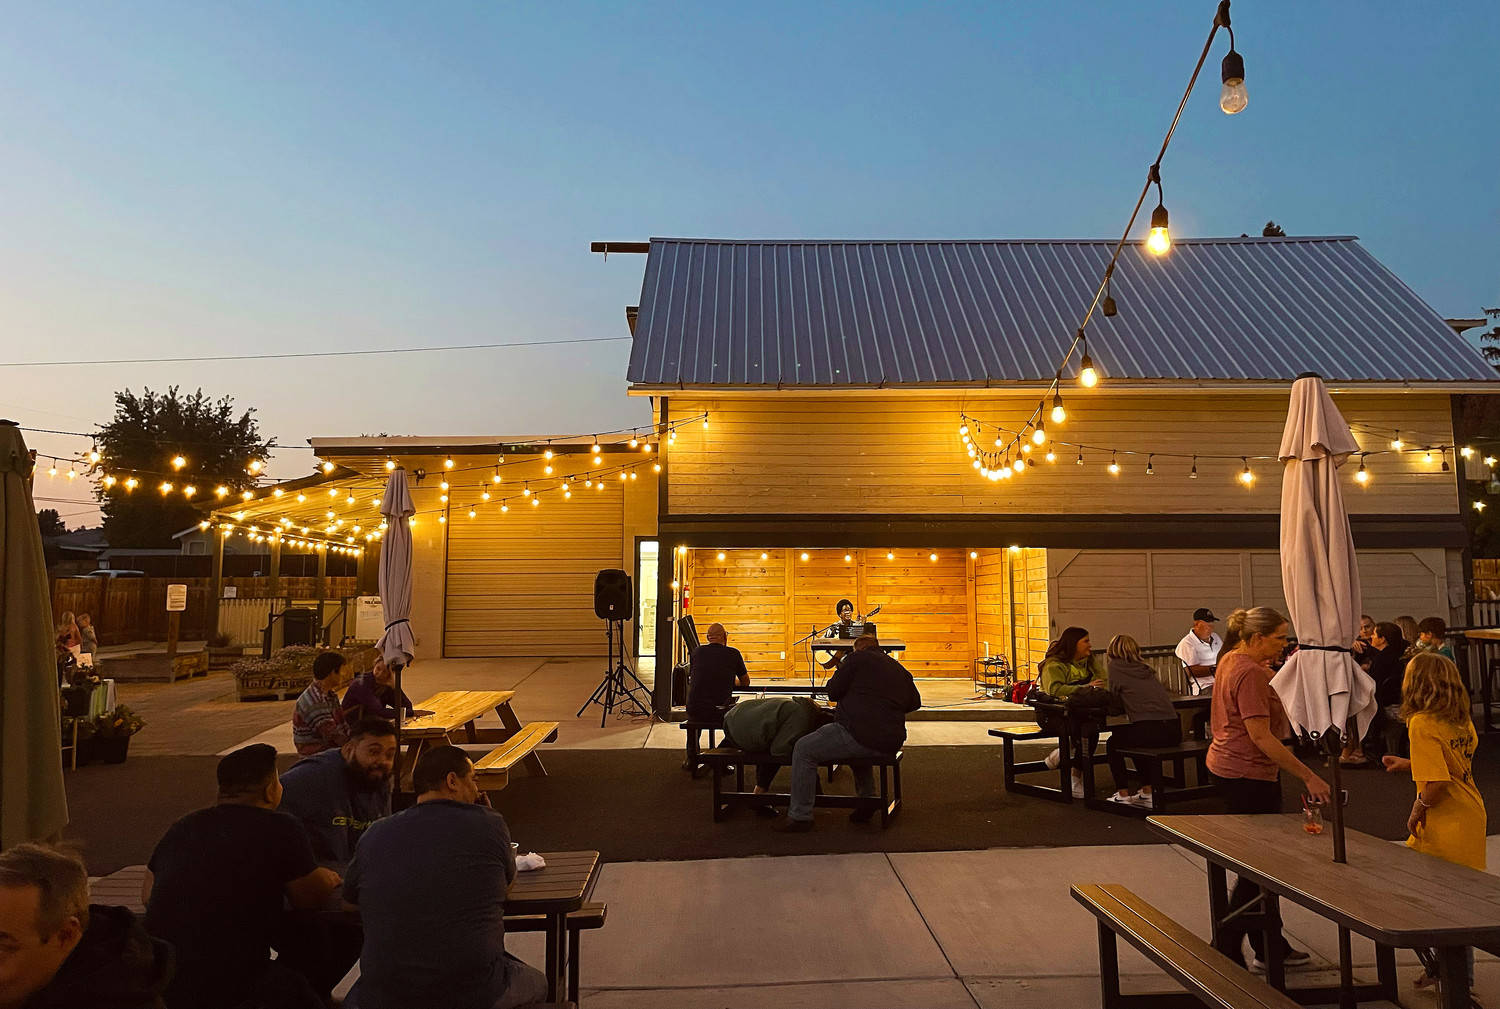 Outdoor seating & event space